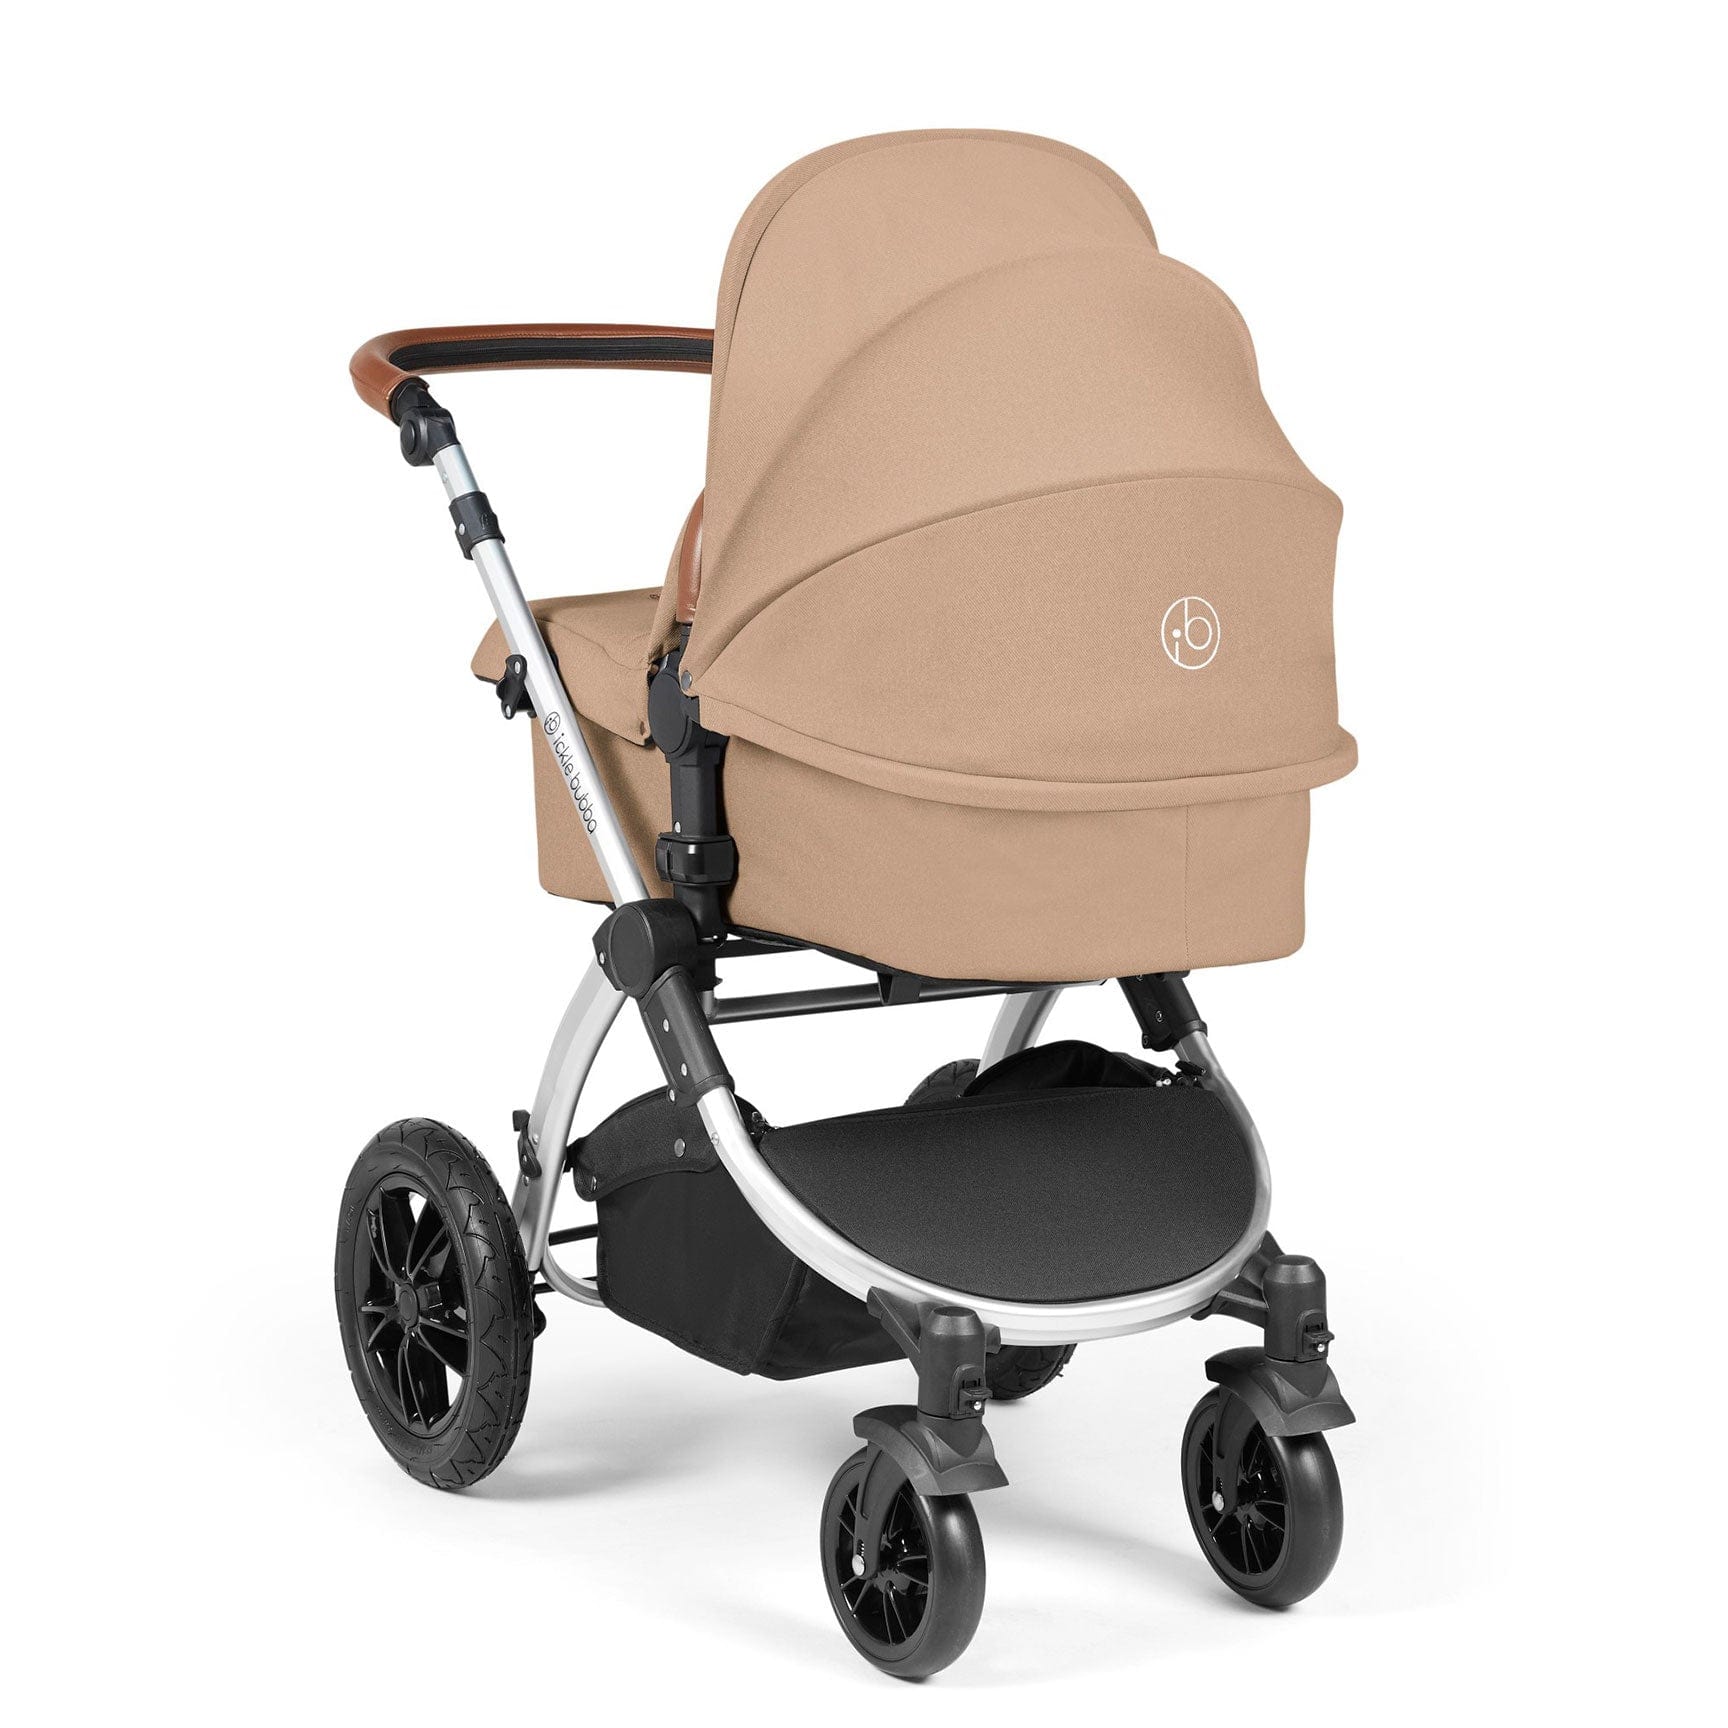 Ickle Bubba Stomp Luxe All-in-One Travel System with Isofix Base in Silver/Desert/Tan Travel Systems 10-011-300-258 5056515026580